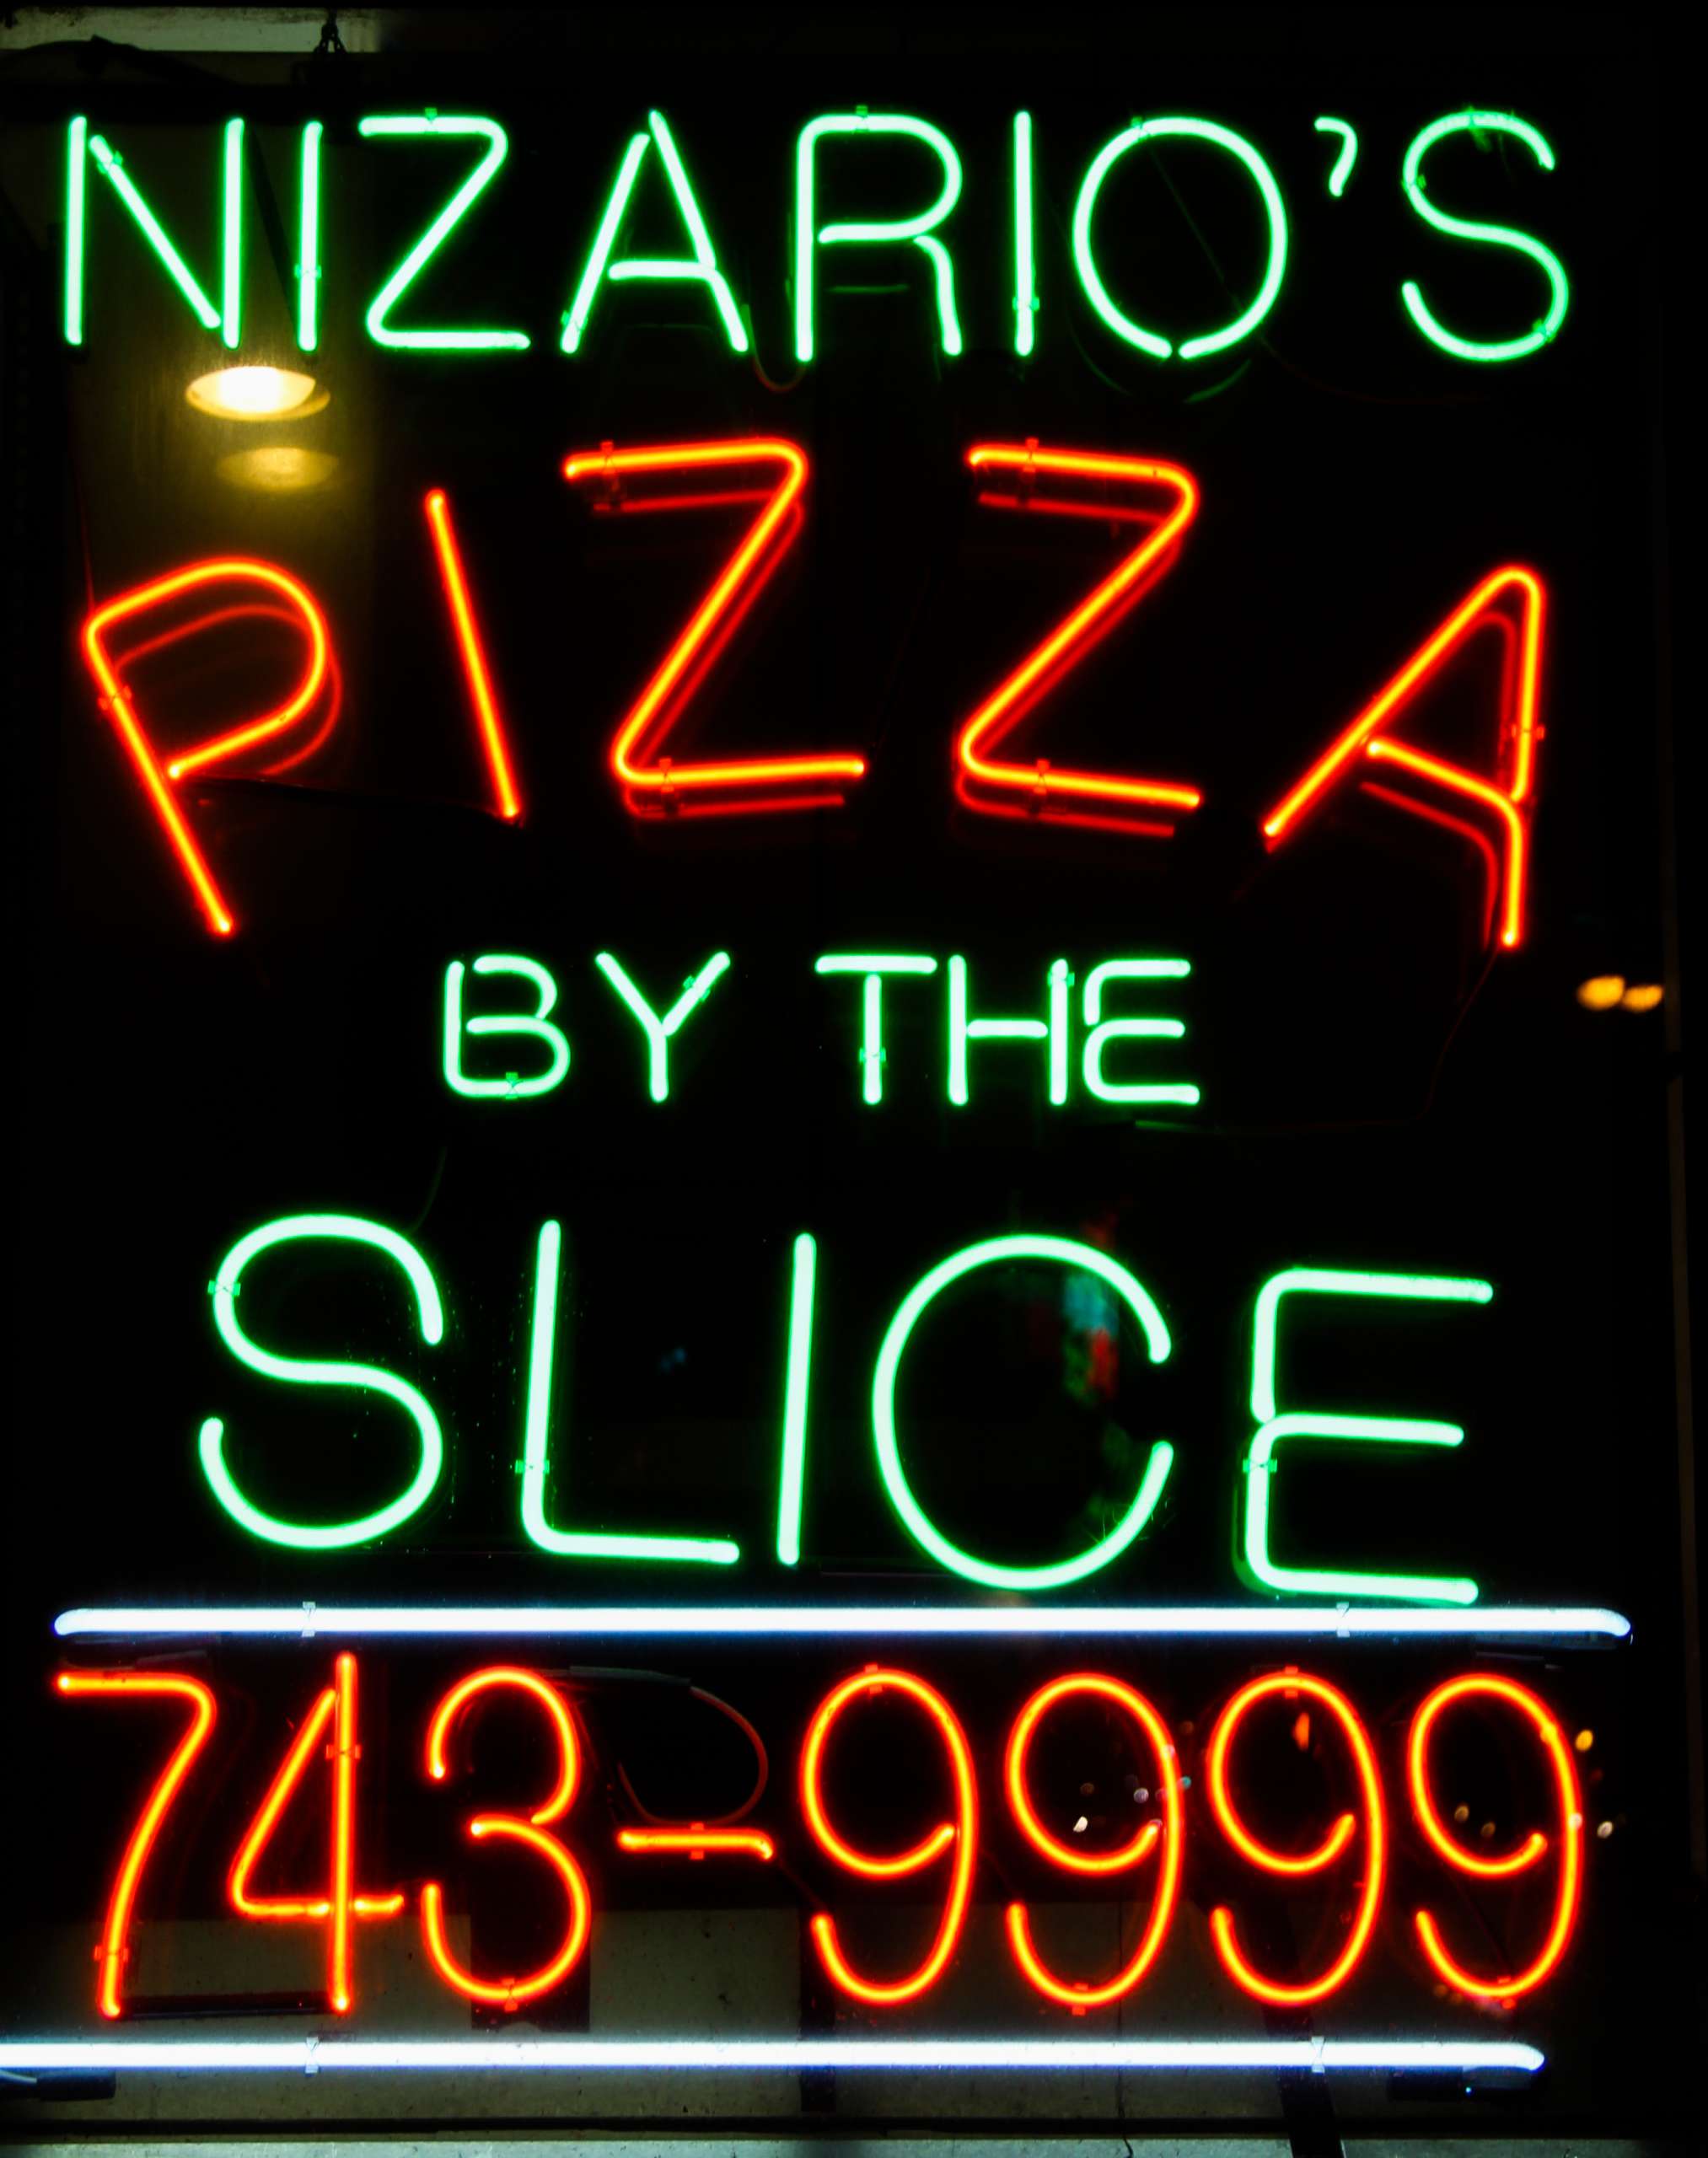 Neon pizza sign.